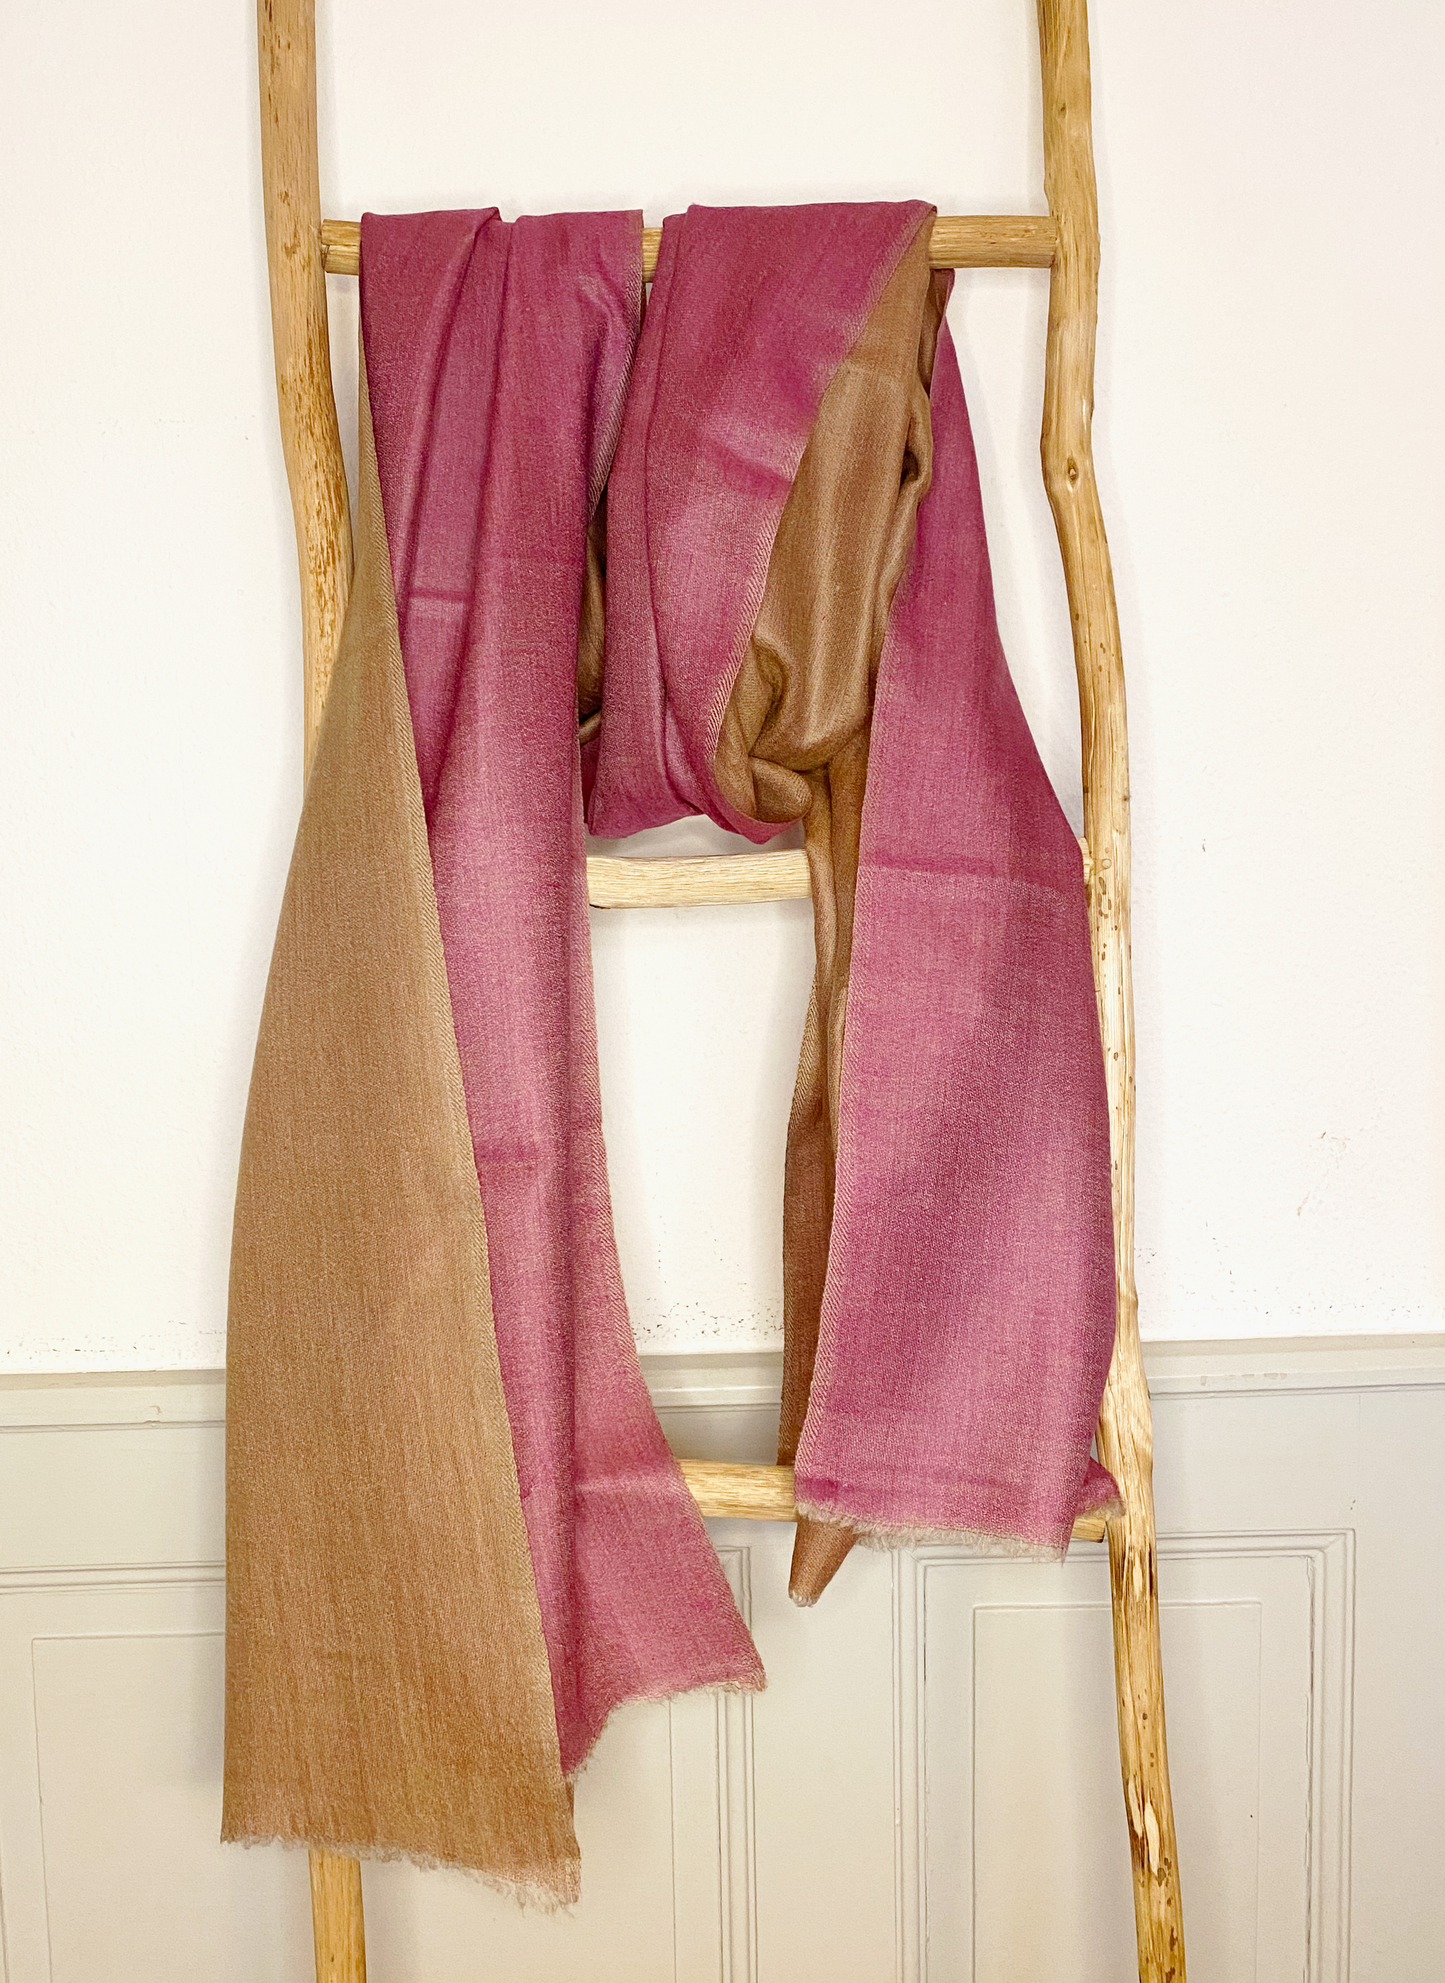 Laal's double-sided stole, made from 100% cashmere, is light, soft, and exquisite Handmade Reversible Pashmina Stole.